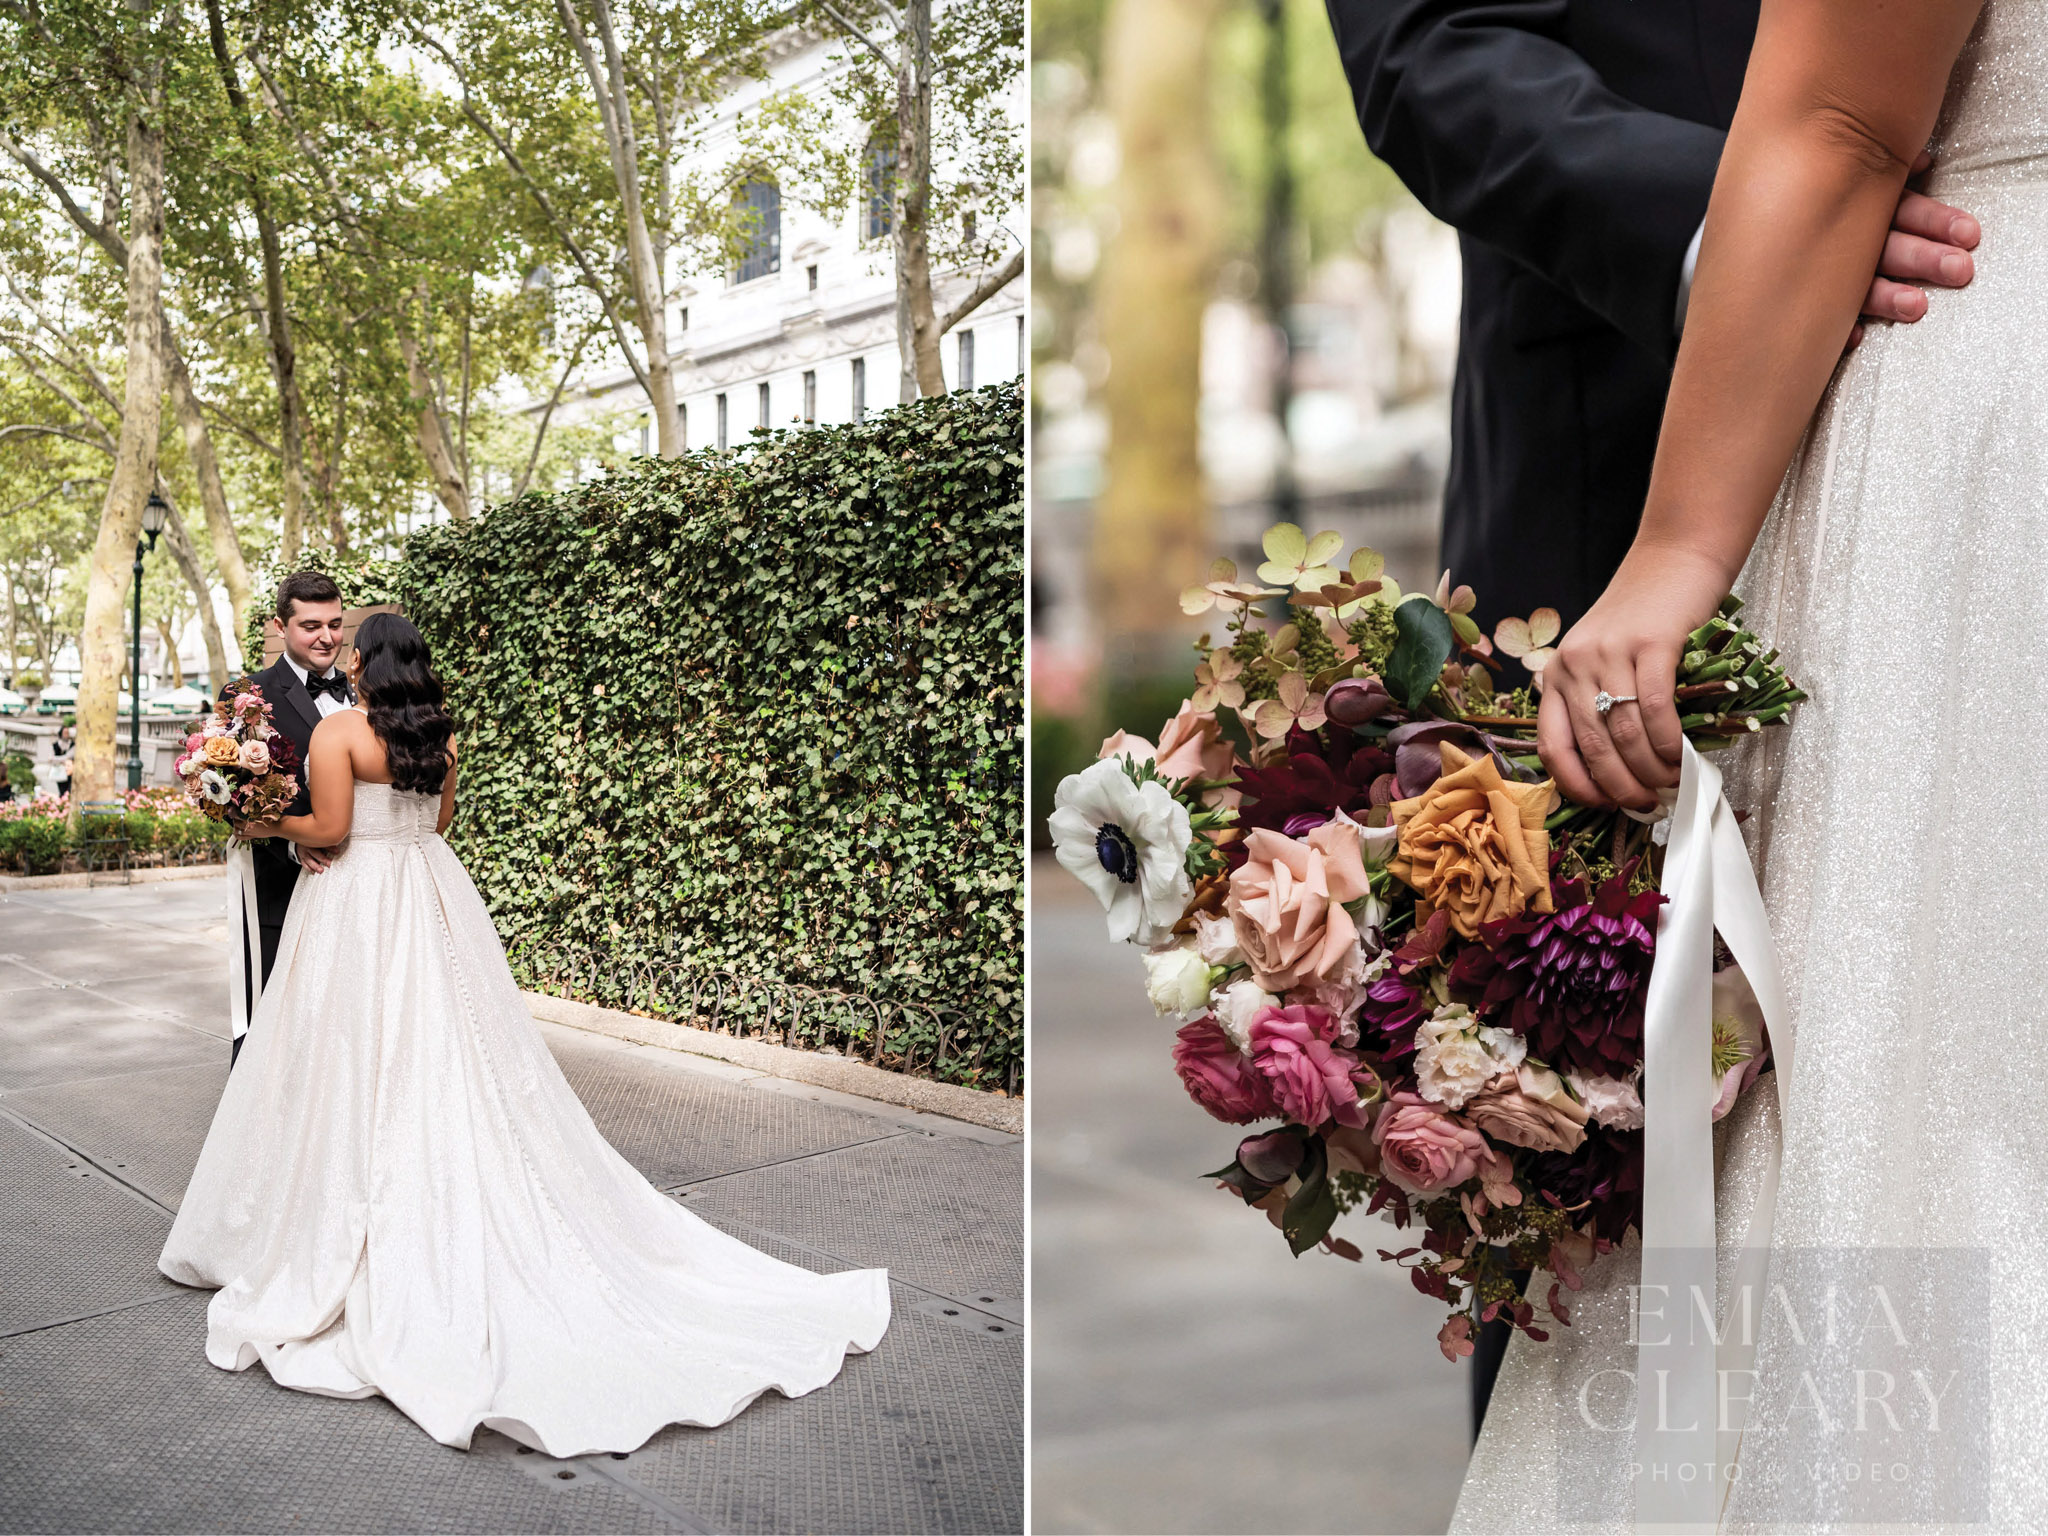 Portrait of a couple and a wedding bouquet